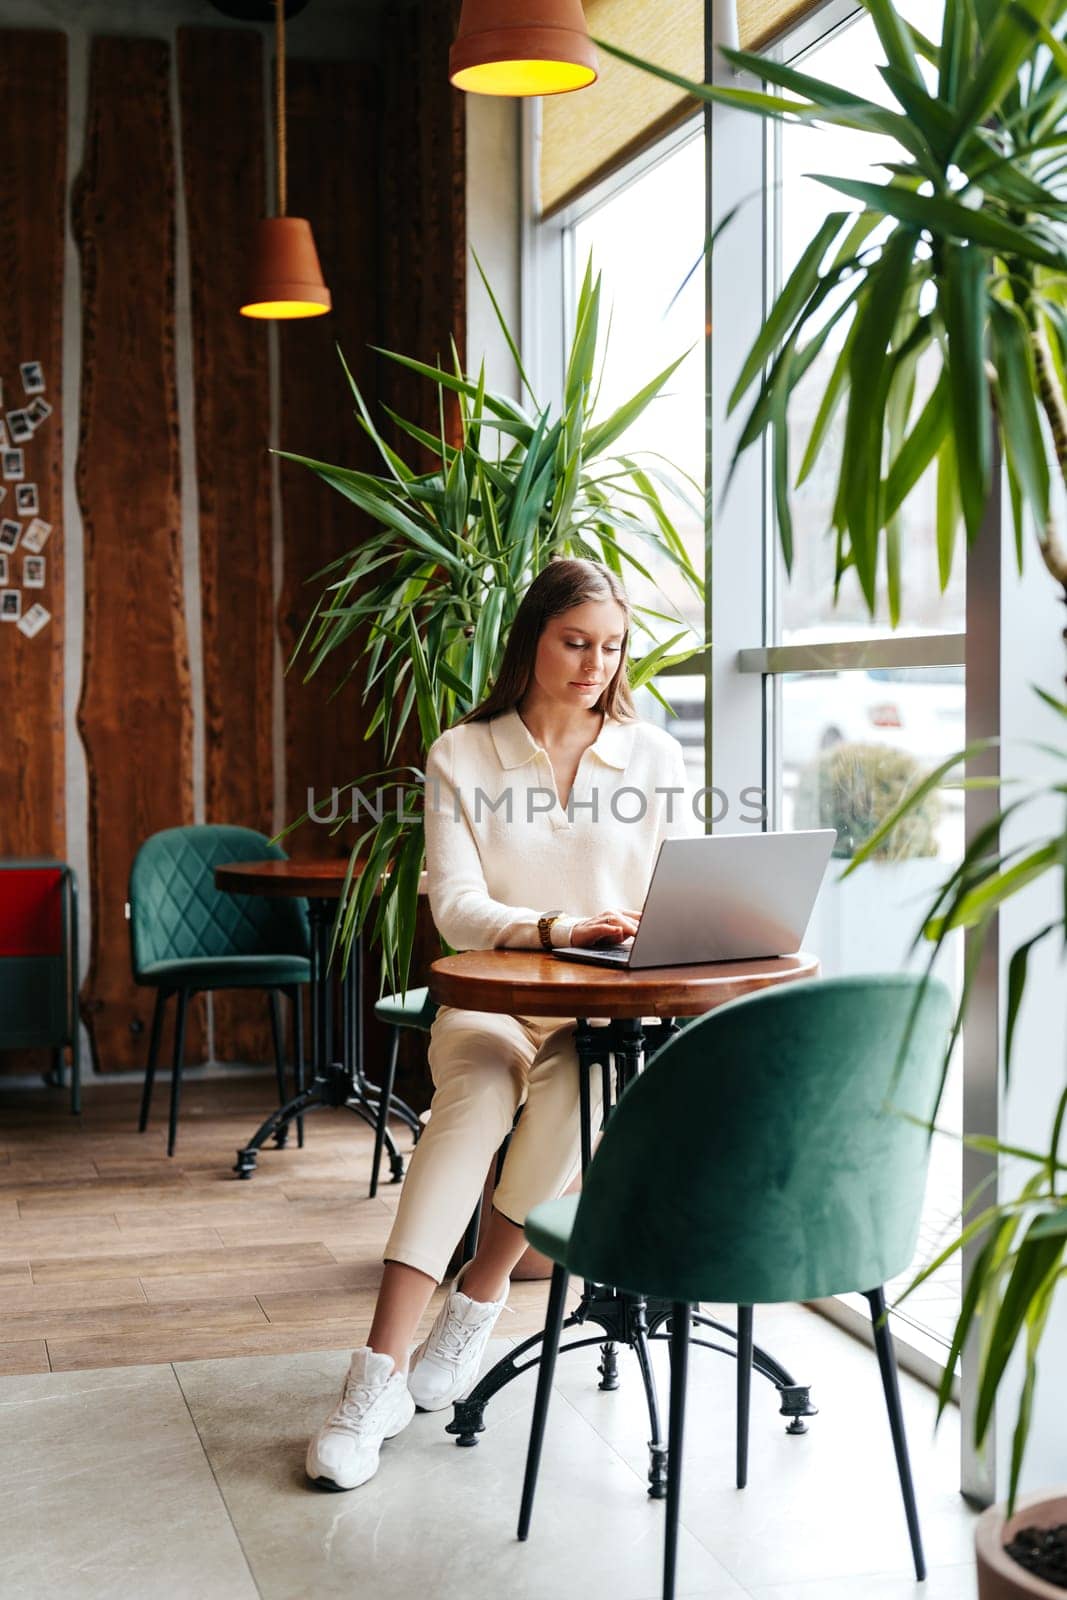 A woman of Indian descent is sitting at a wooden table, concentrating on her laptop screen. She appears to be working or studying intently, with a cup of coffee beside her. The room is well-lit and clutter-free.